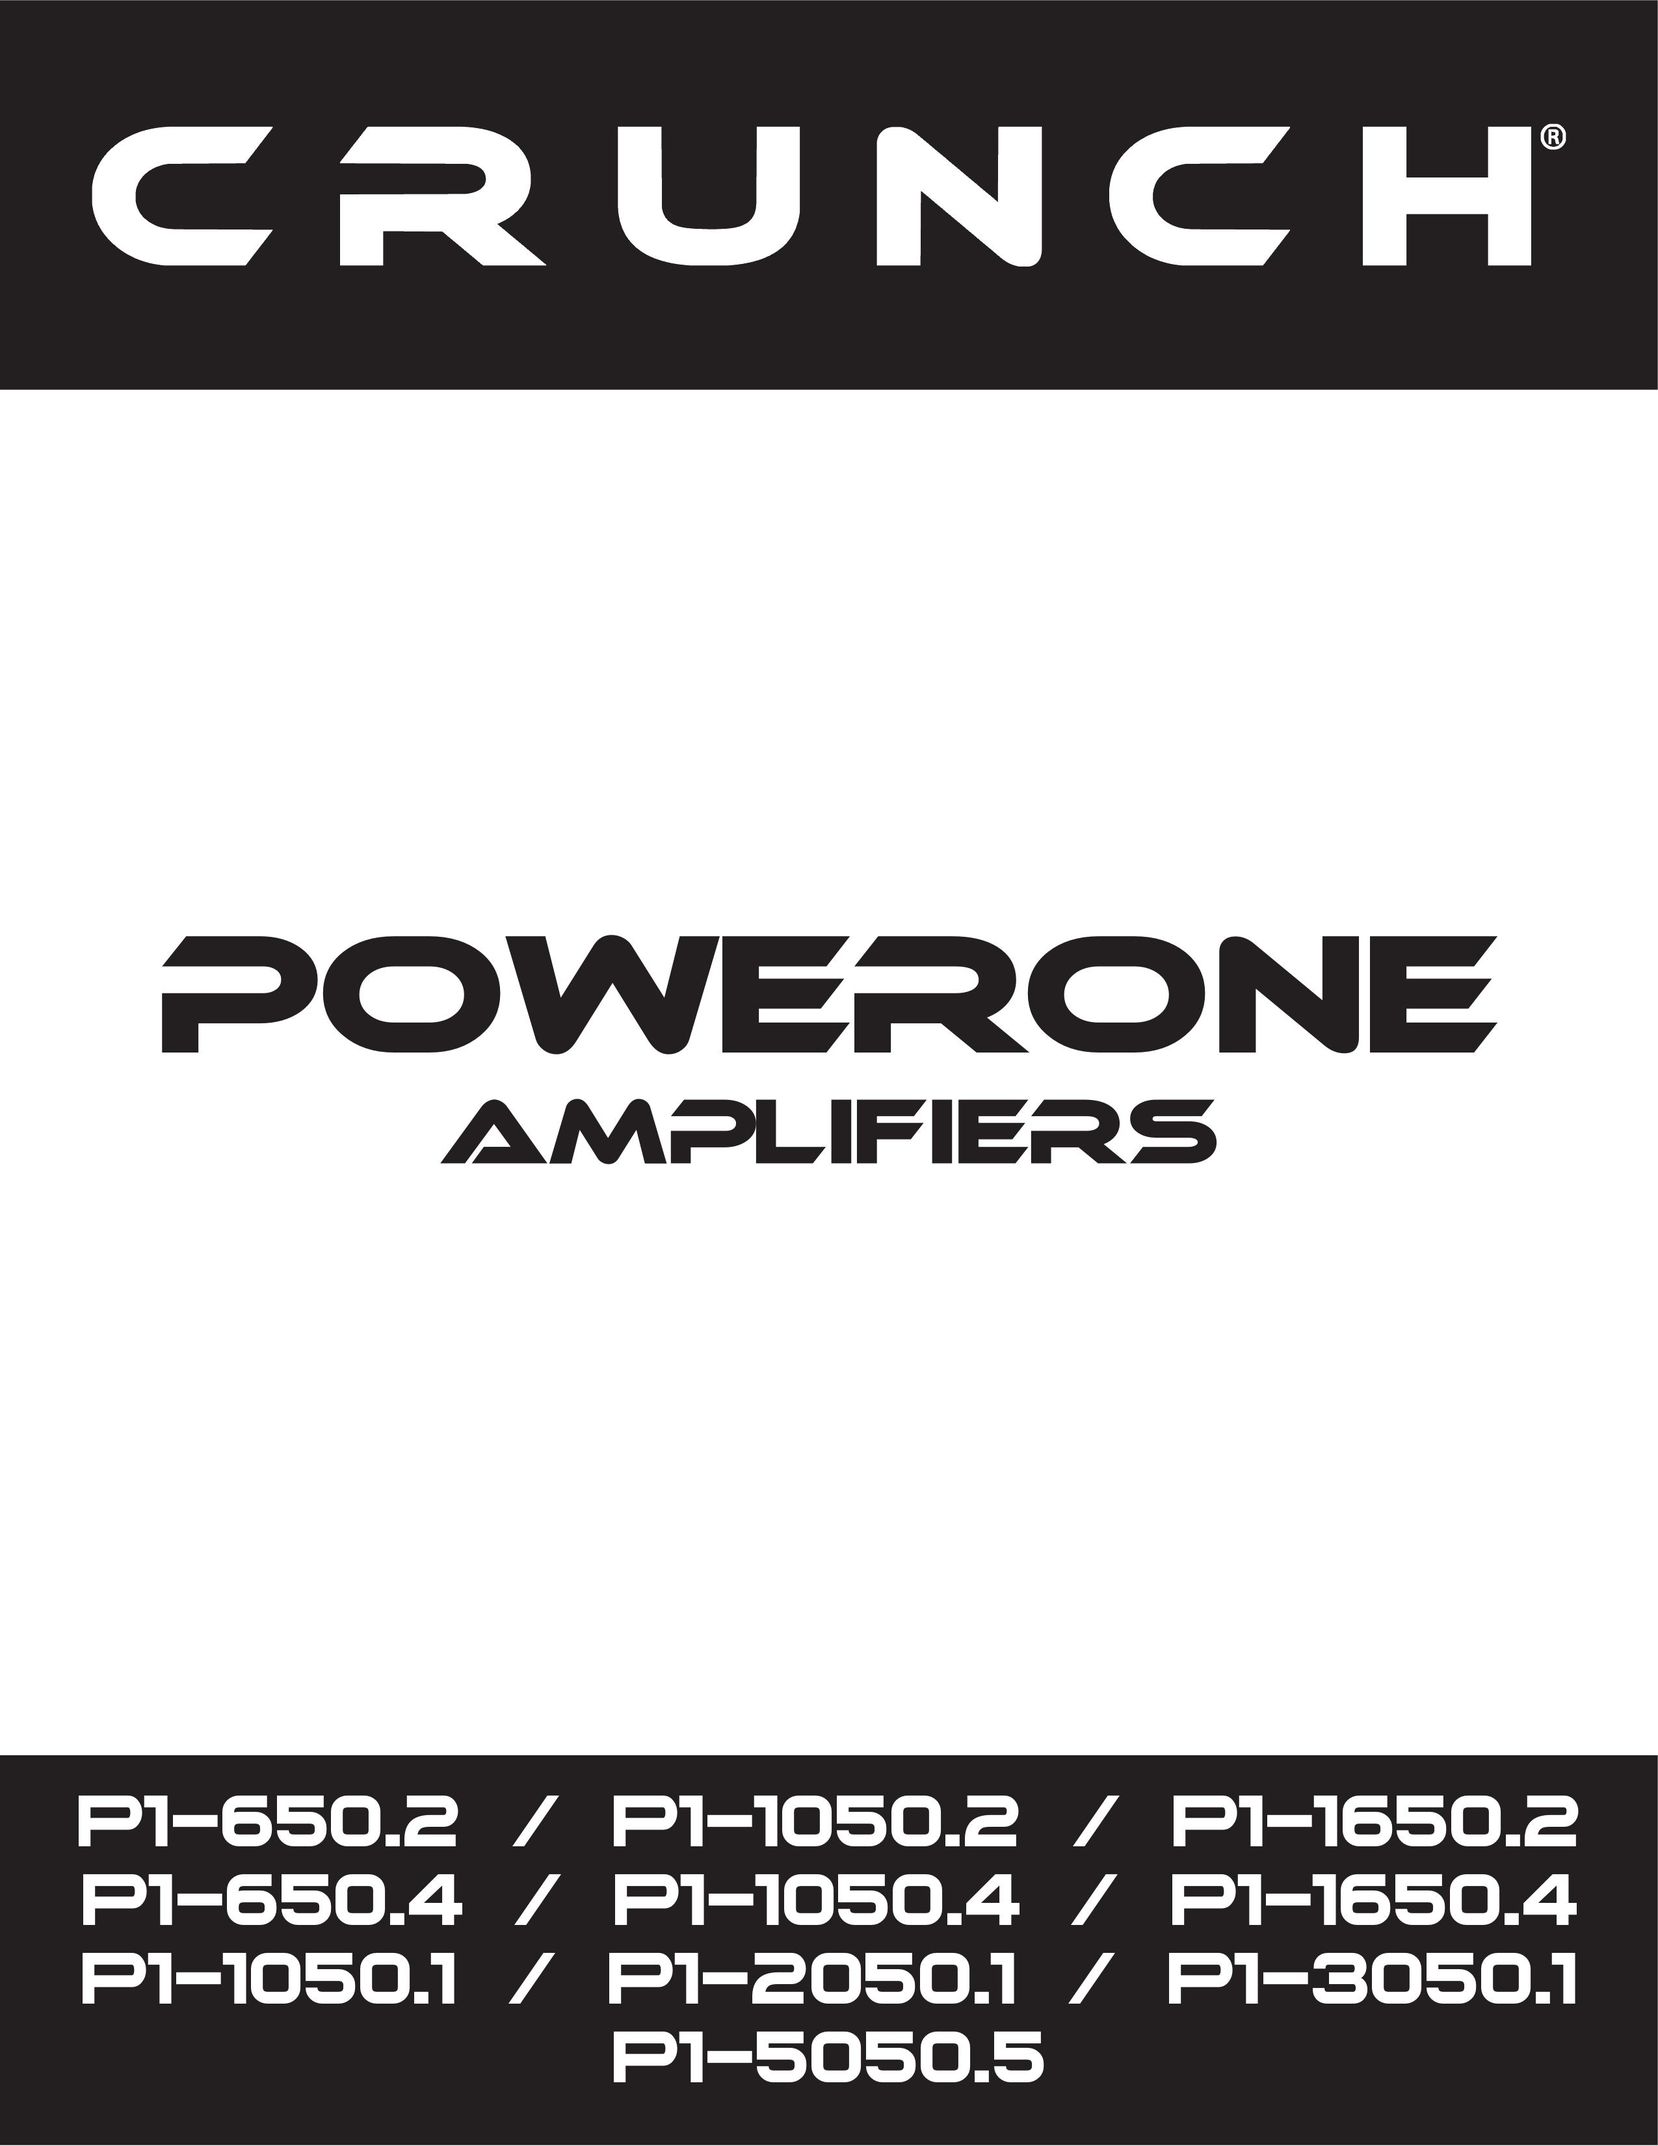 Crunch P1-1650.2 Stereo Amplifier User Manual